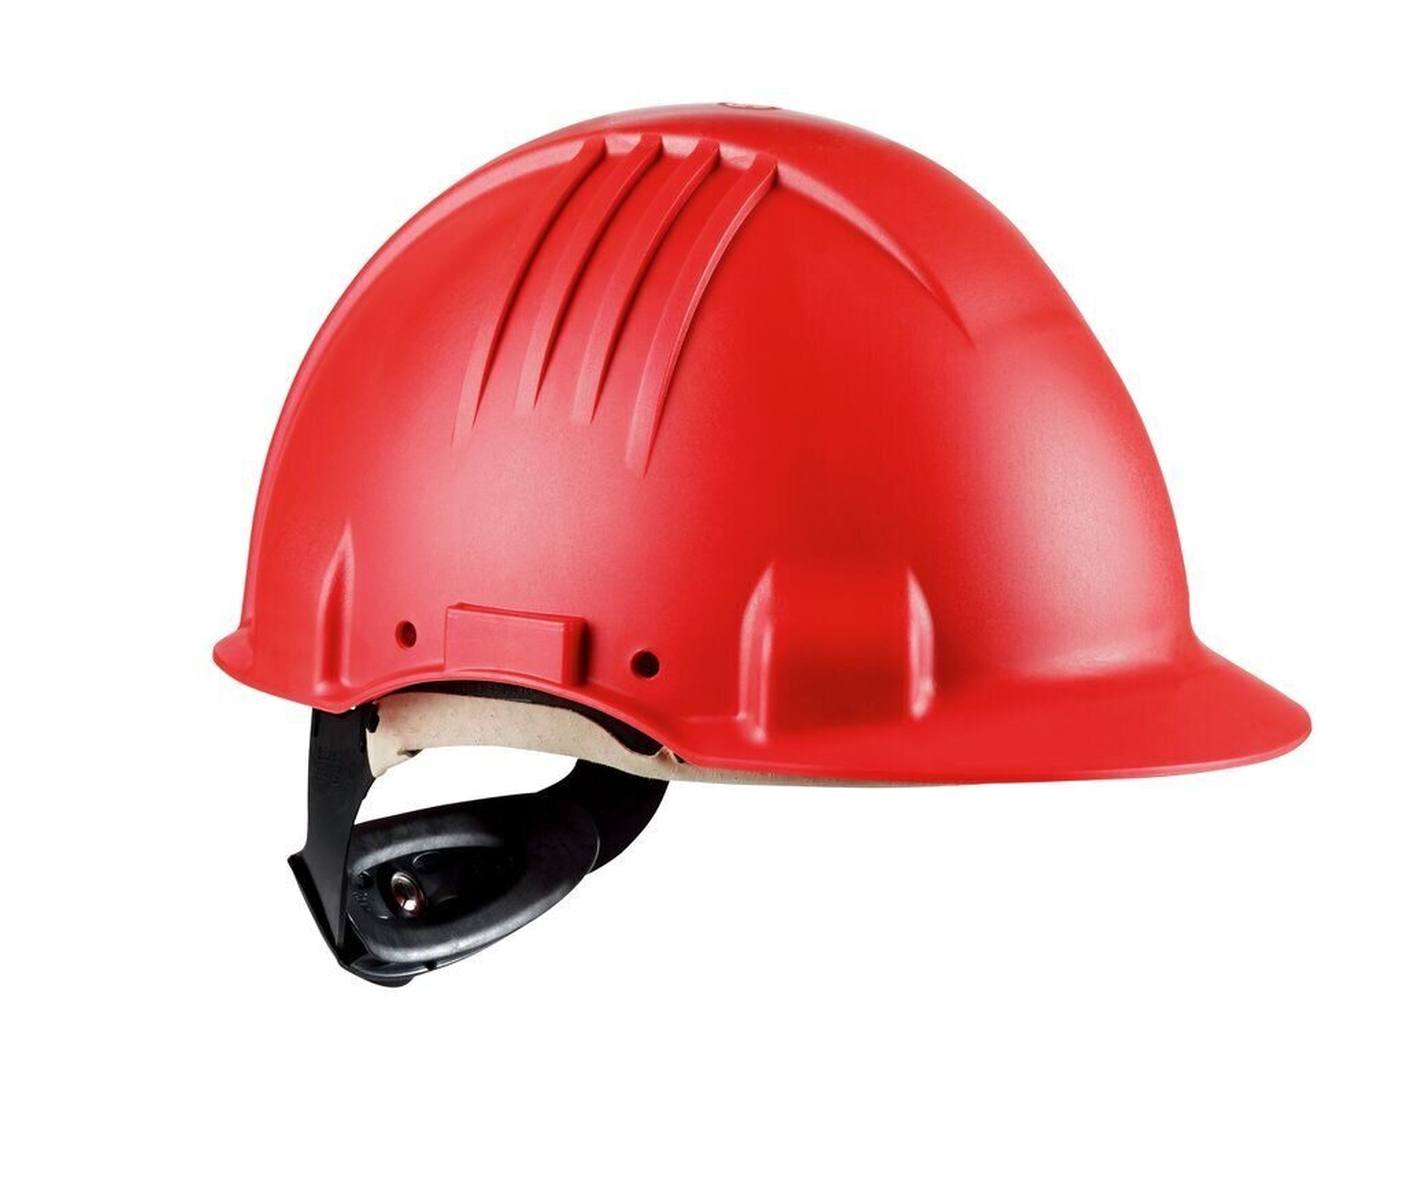 3M High temperature safety helmet, ratchet closure, non-ventilated, dielectric 1000 V, leather sweatband, red, G3501M-RD